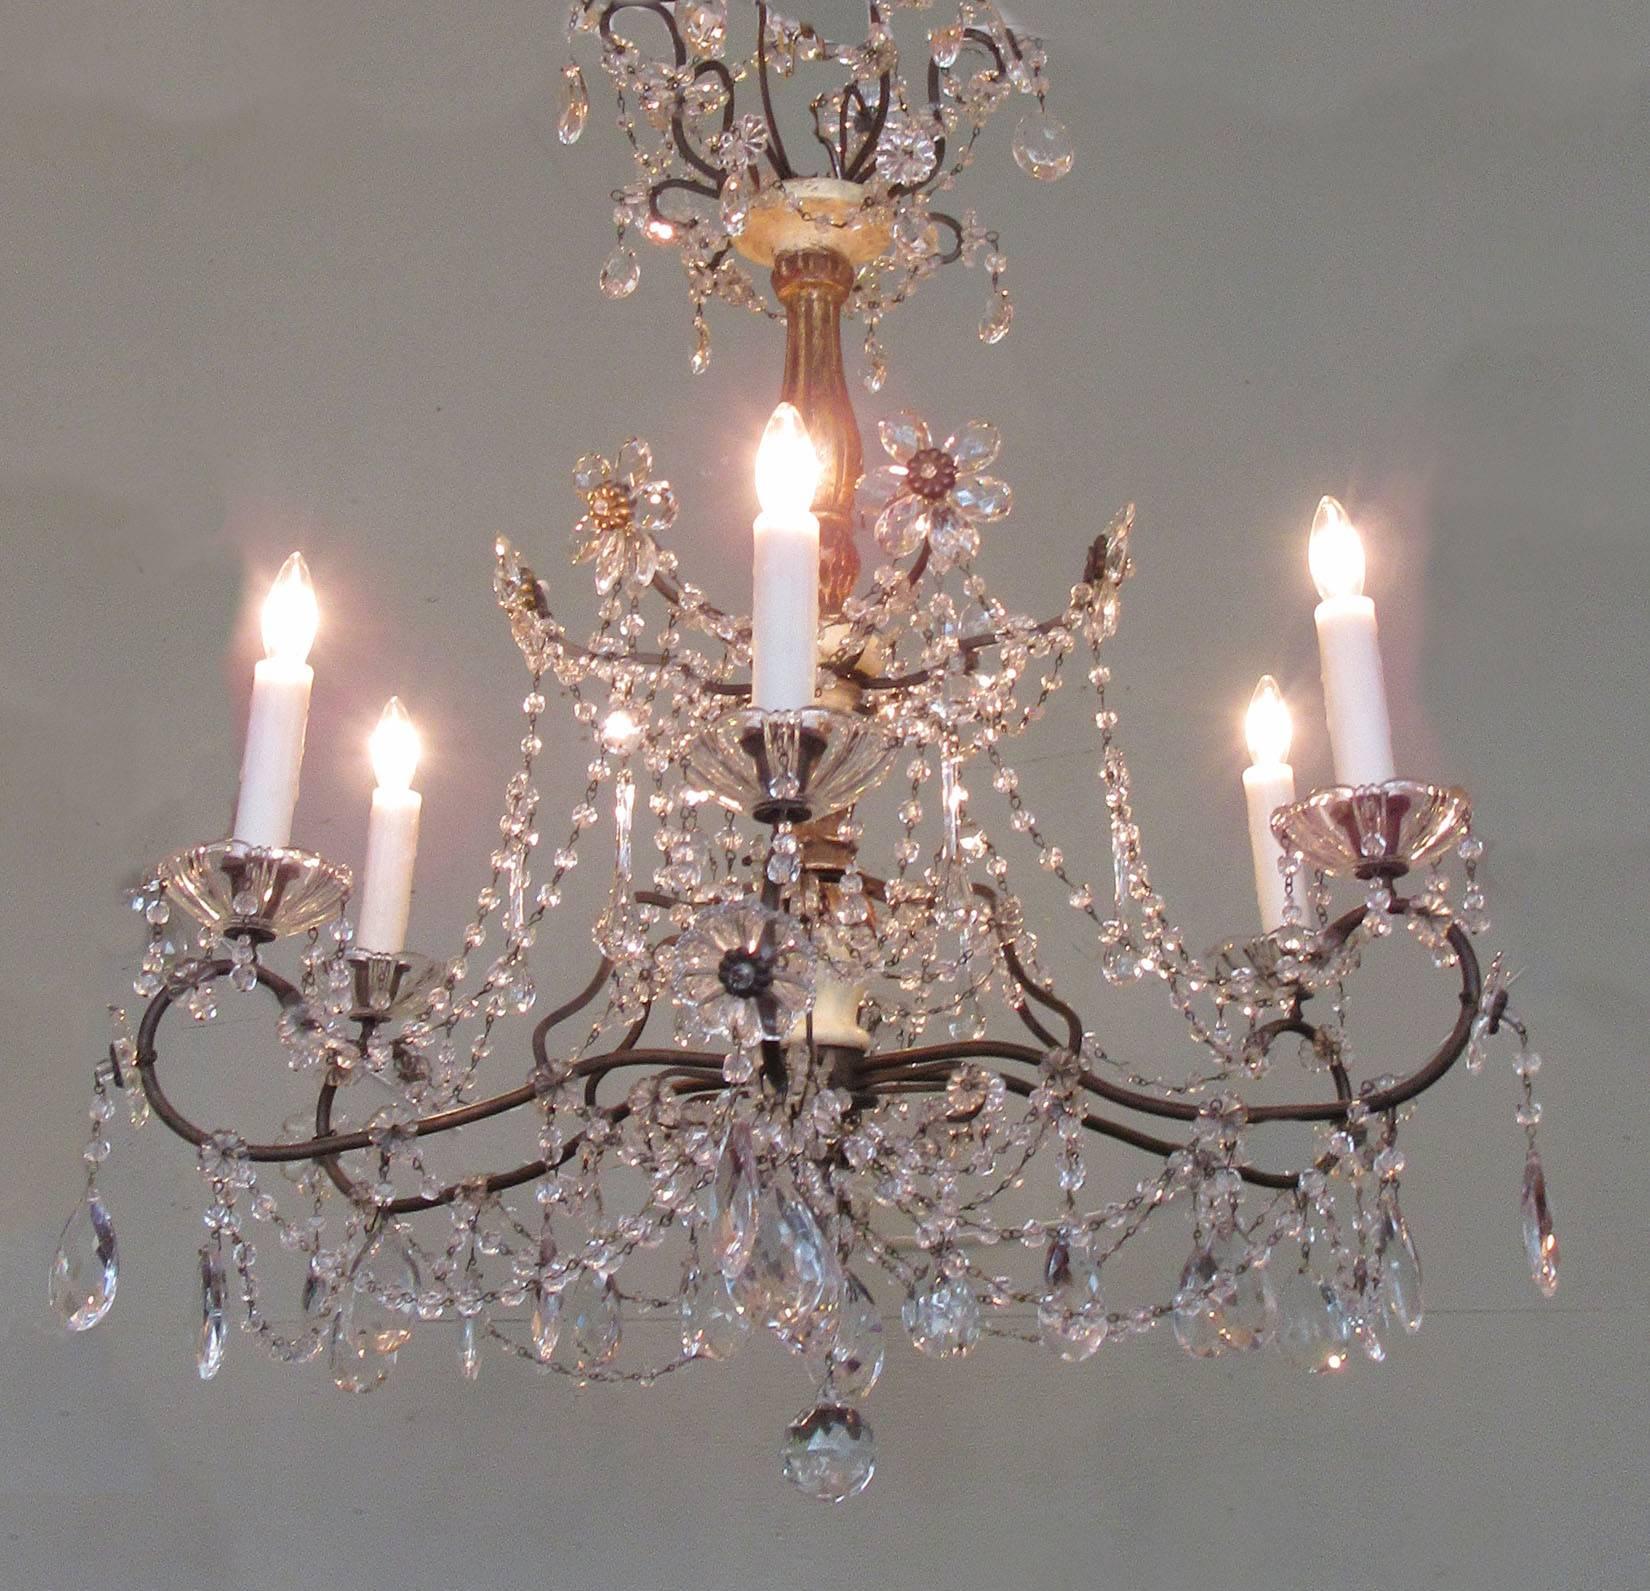 An Italian Genoese crystal chandelier, circa 1920, featuring a giltwood and ivory painted stem and six candle bulb tole arms adorned with crystal beaded swag, pendants and rosettes.